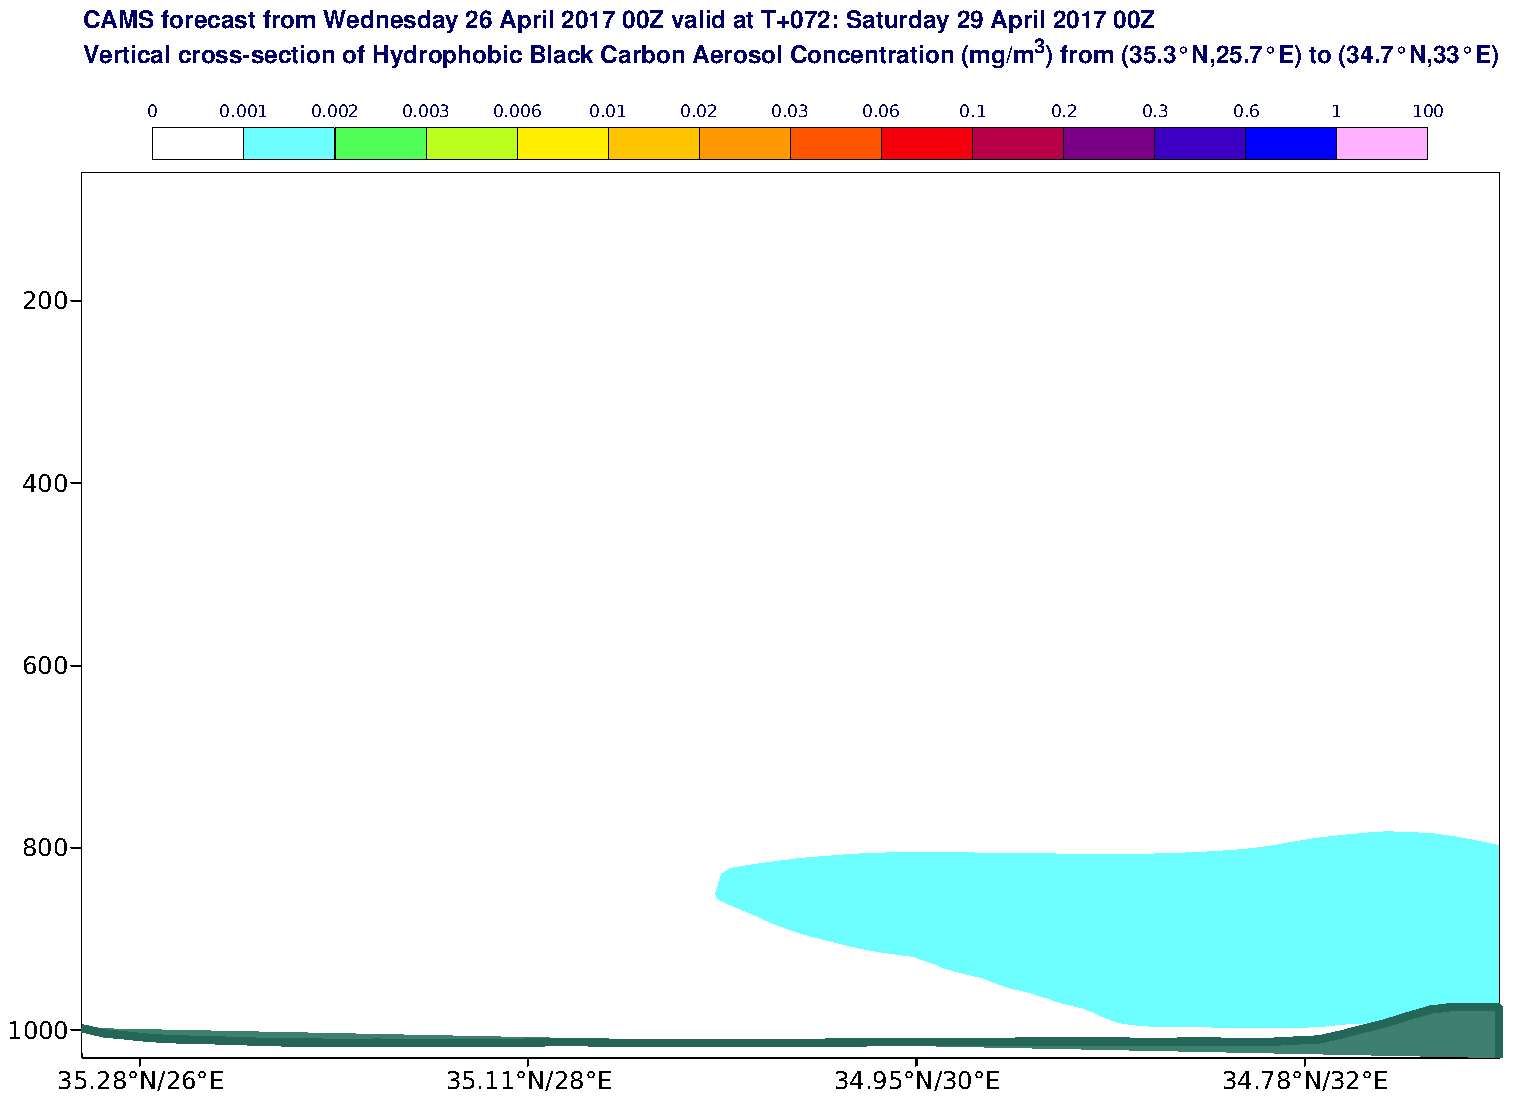 Vertical cross-section of Hydrophobic Black Carbon Aerosol Concentration (mg/m3) valid at T72 - 2017-04-29 00:00